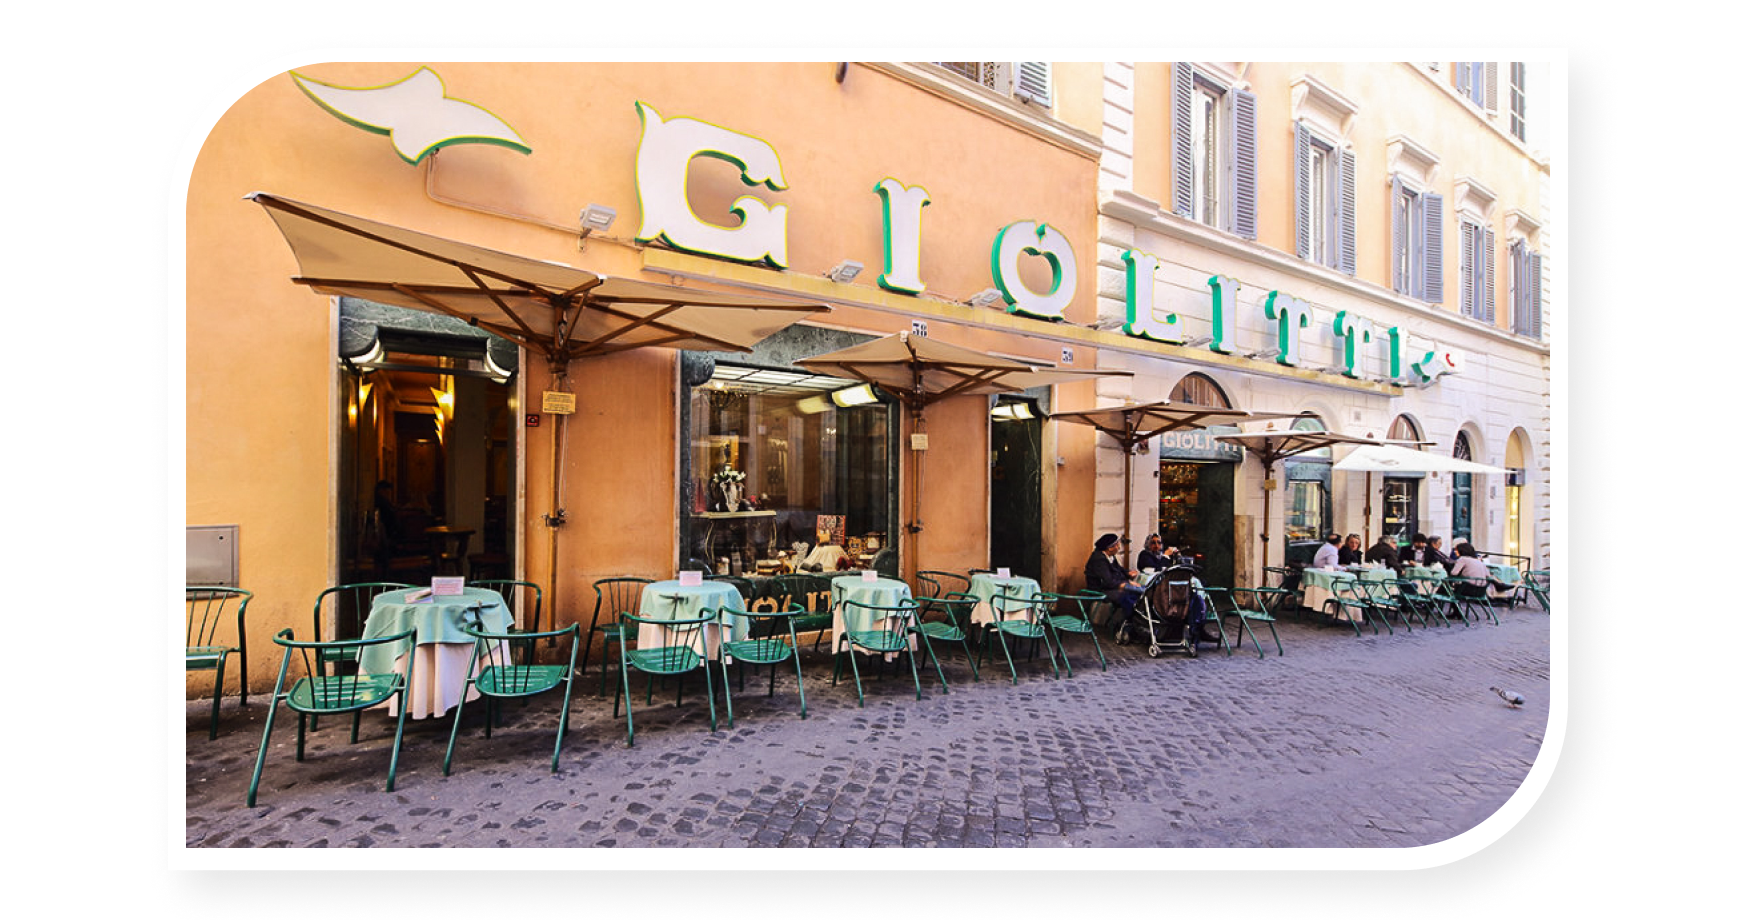 Giolitti cafe outside view